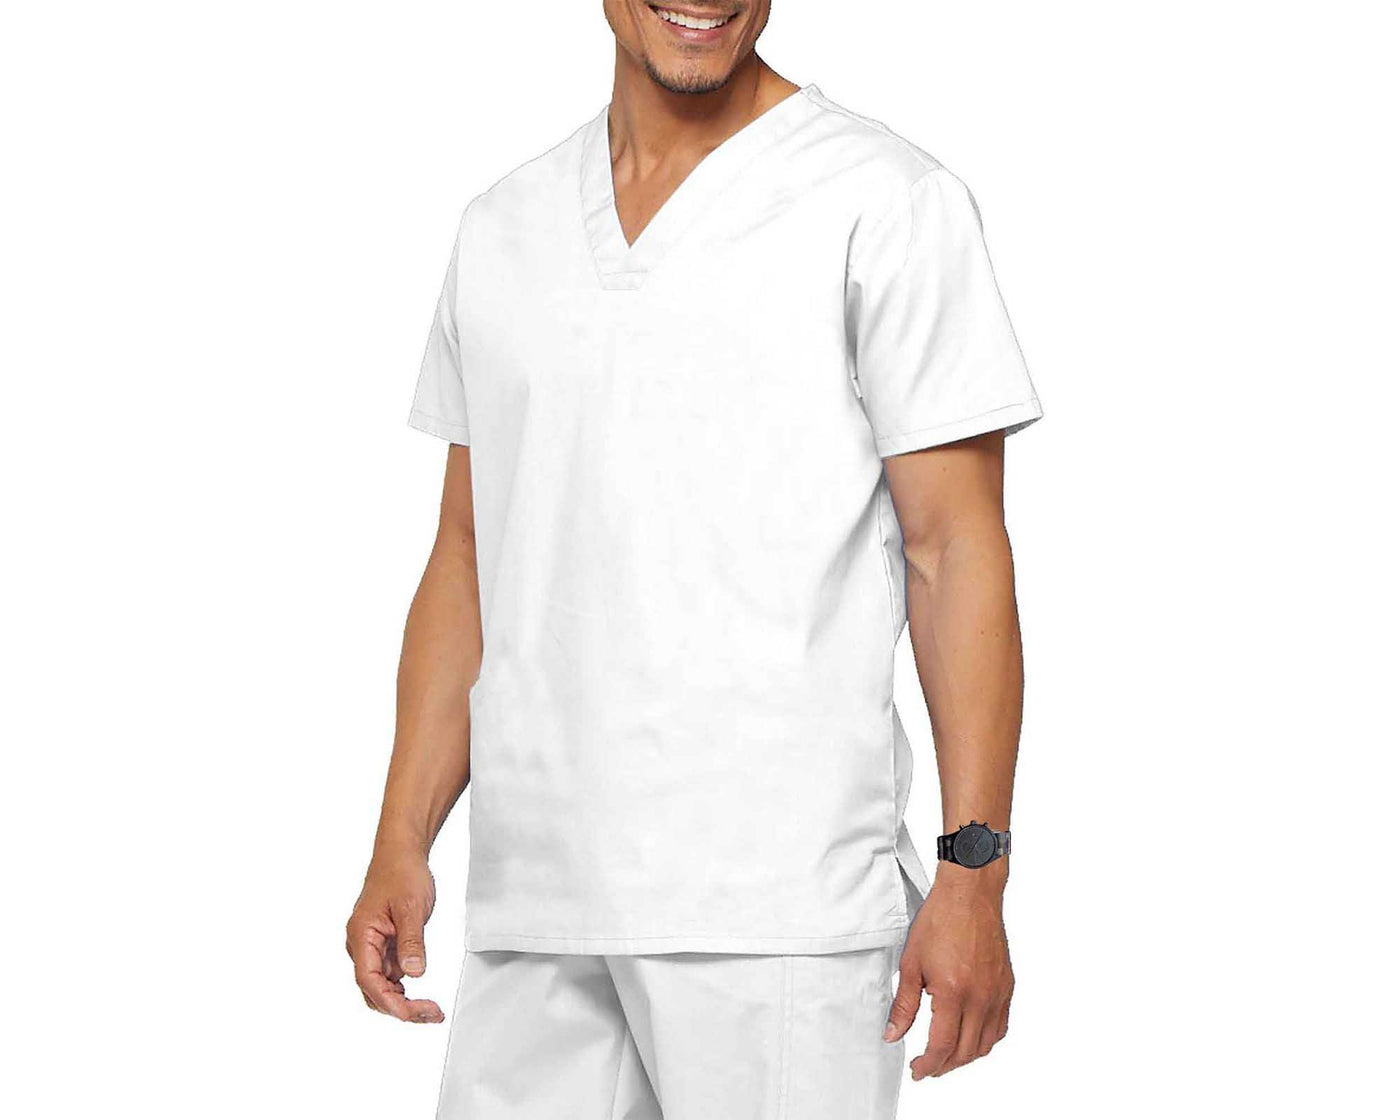 Man wearing White cook shirt in V neck style with black wrist watch